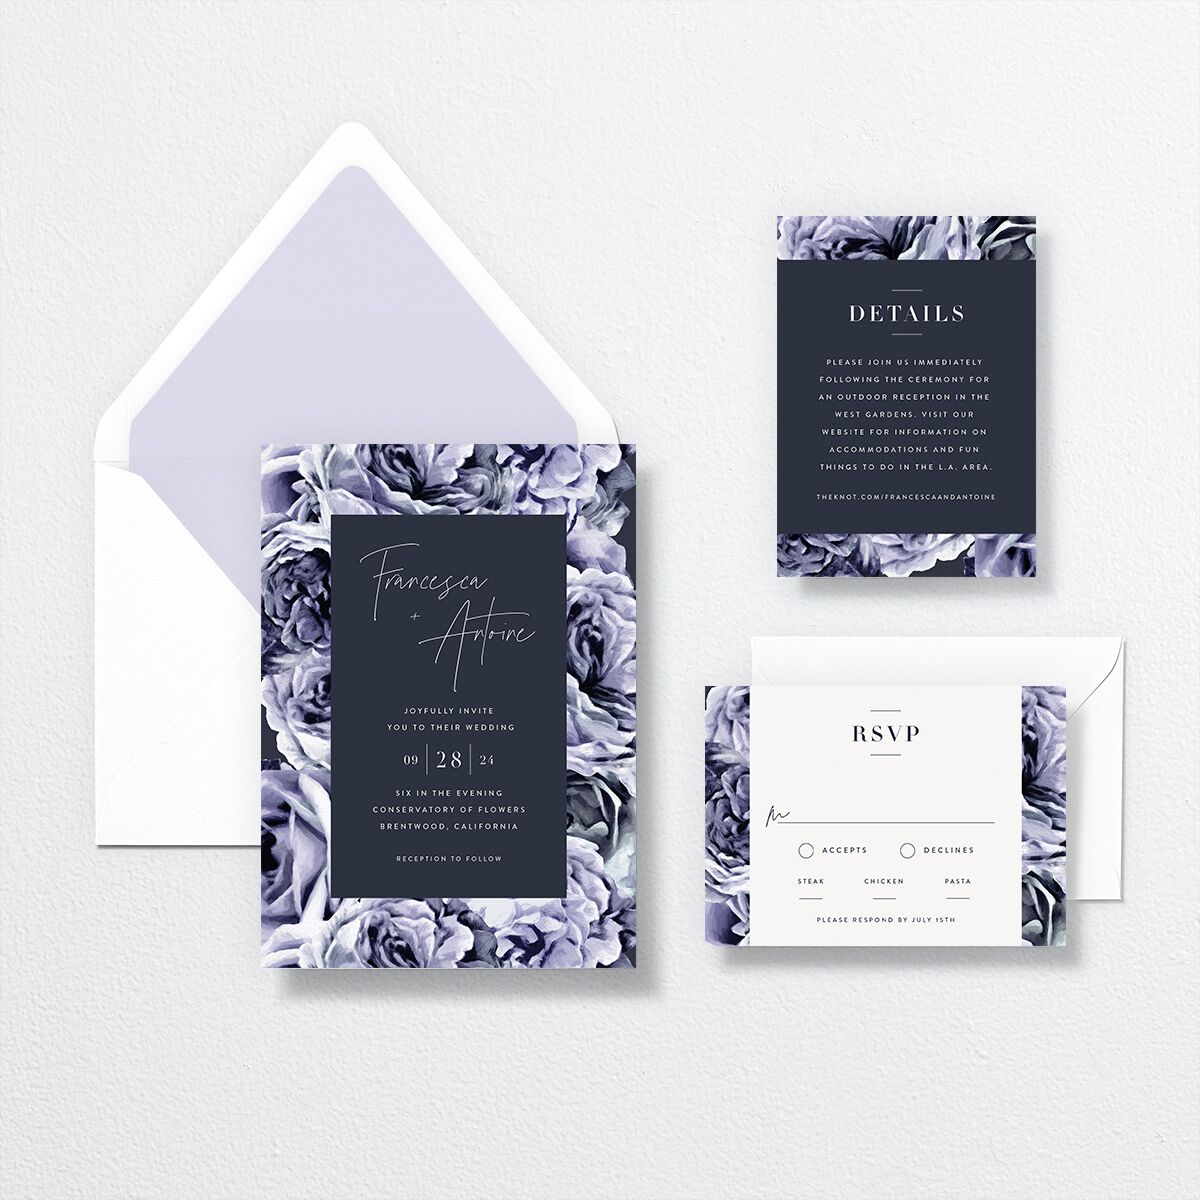 Rose Garden Wedding Invitations by Vera Wang suite in blue